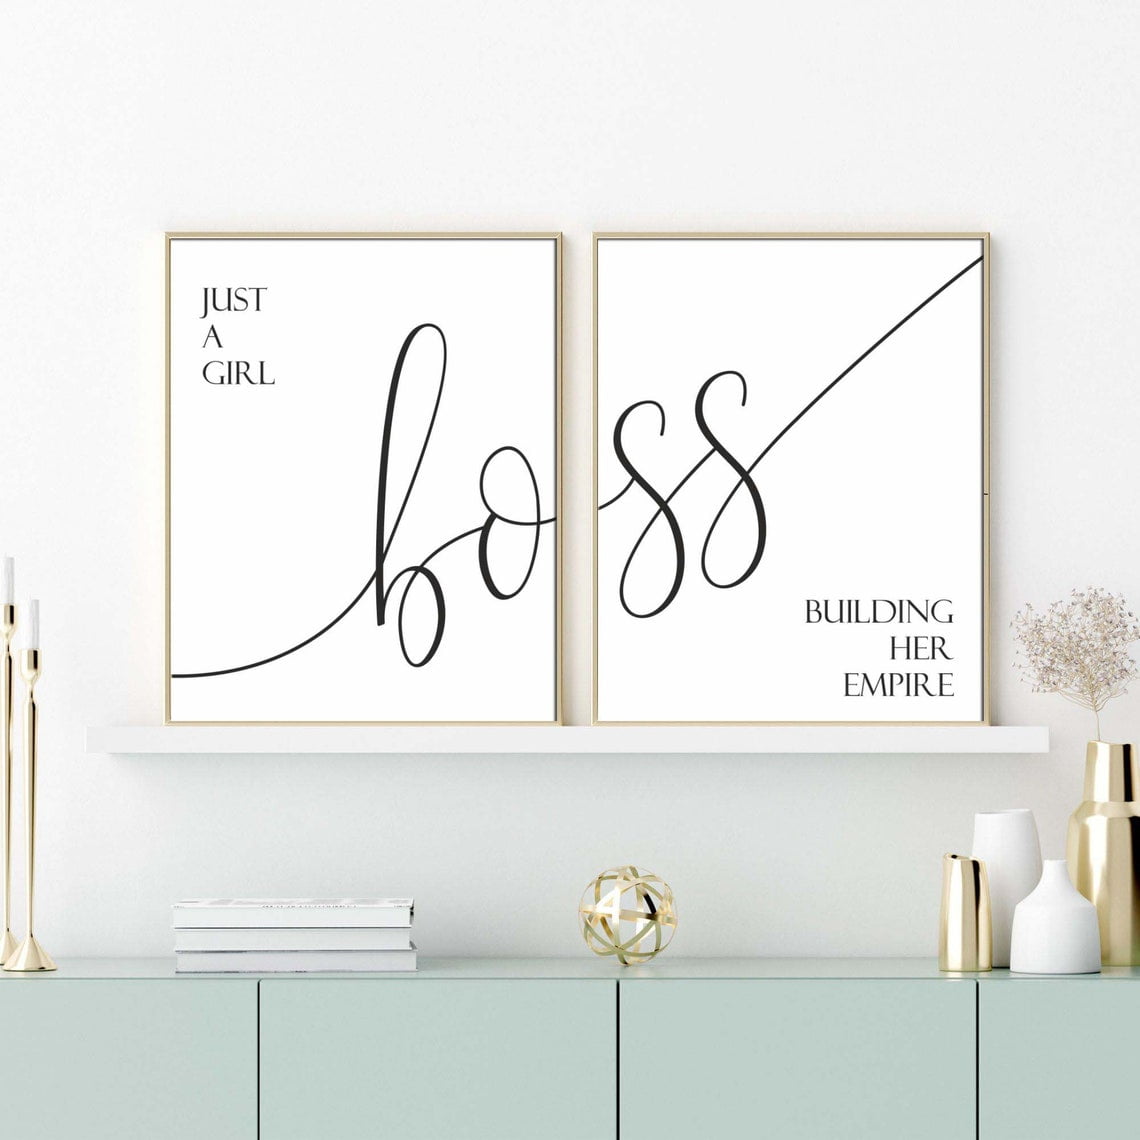 Boss Wall For Unframed Poster Empire Just for Building Gift 2 A of Lady Prints Her Girl Canvas Office Art Painting Boss Decor Office Set New